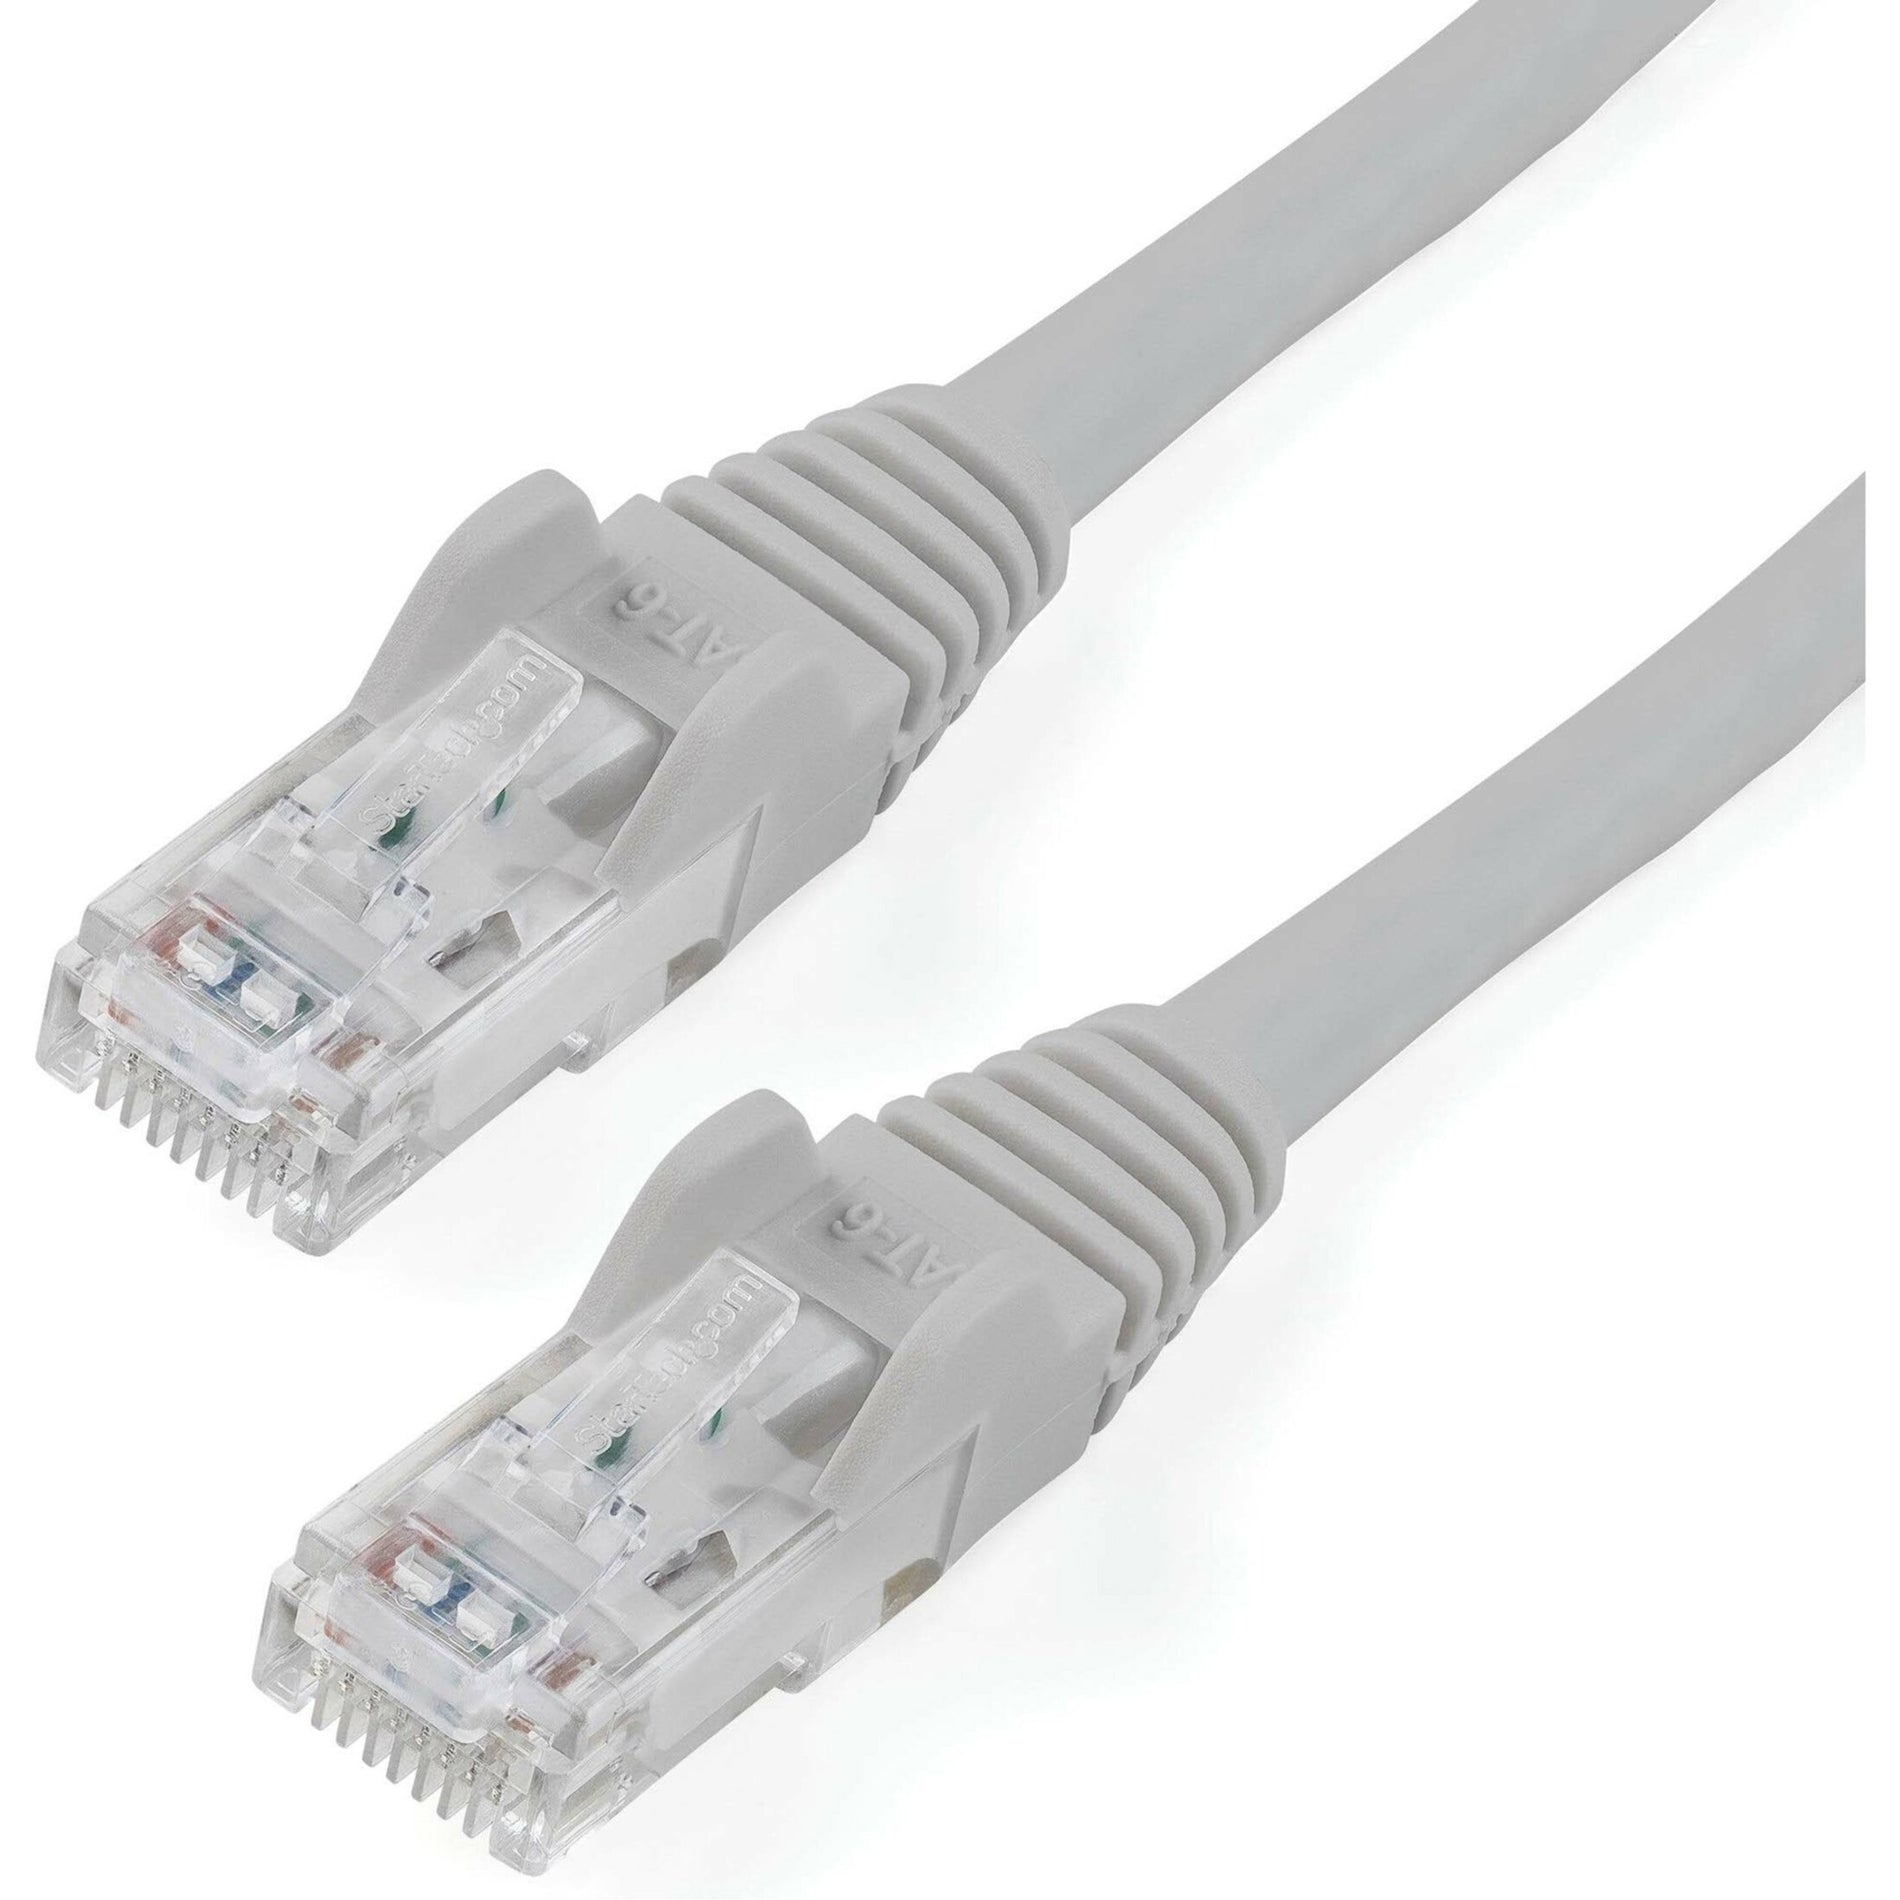 StarTech.com N6PATCH125GR Cat6 Patch Cable with Snagless RJ45 Connectors - Long Ethernet Cable, 125 ft Gray Cat 6 UTP Cable